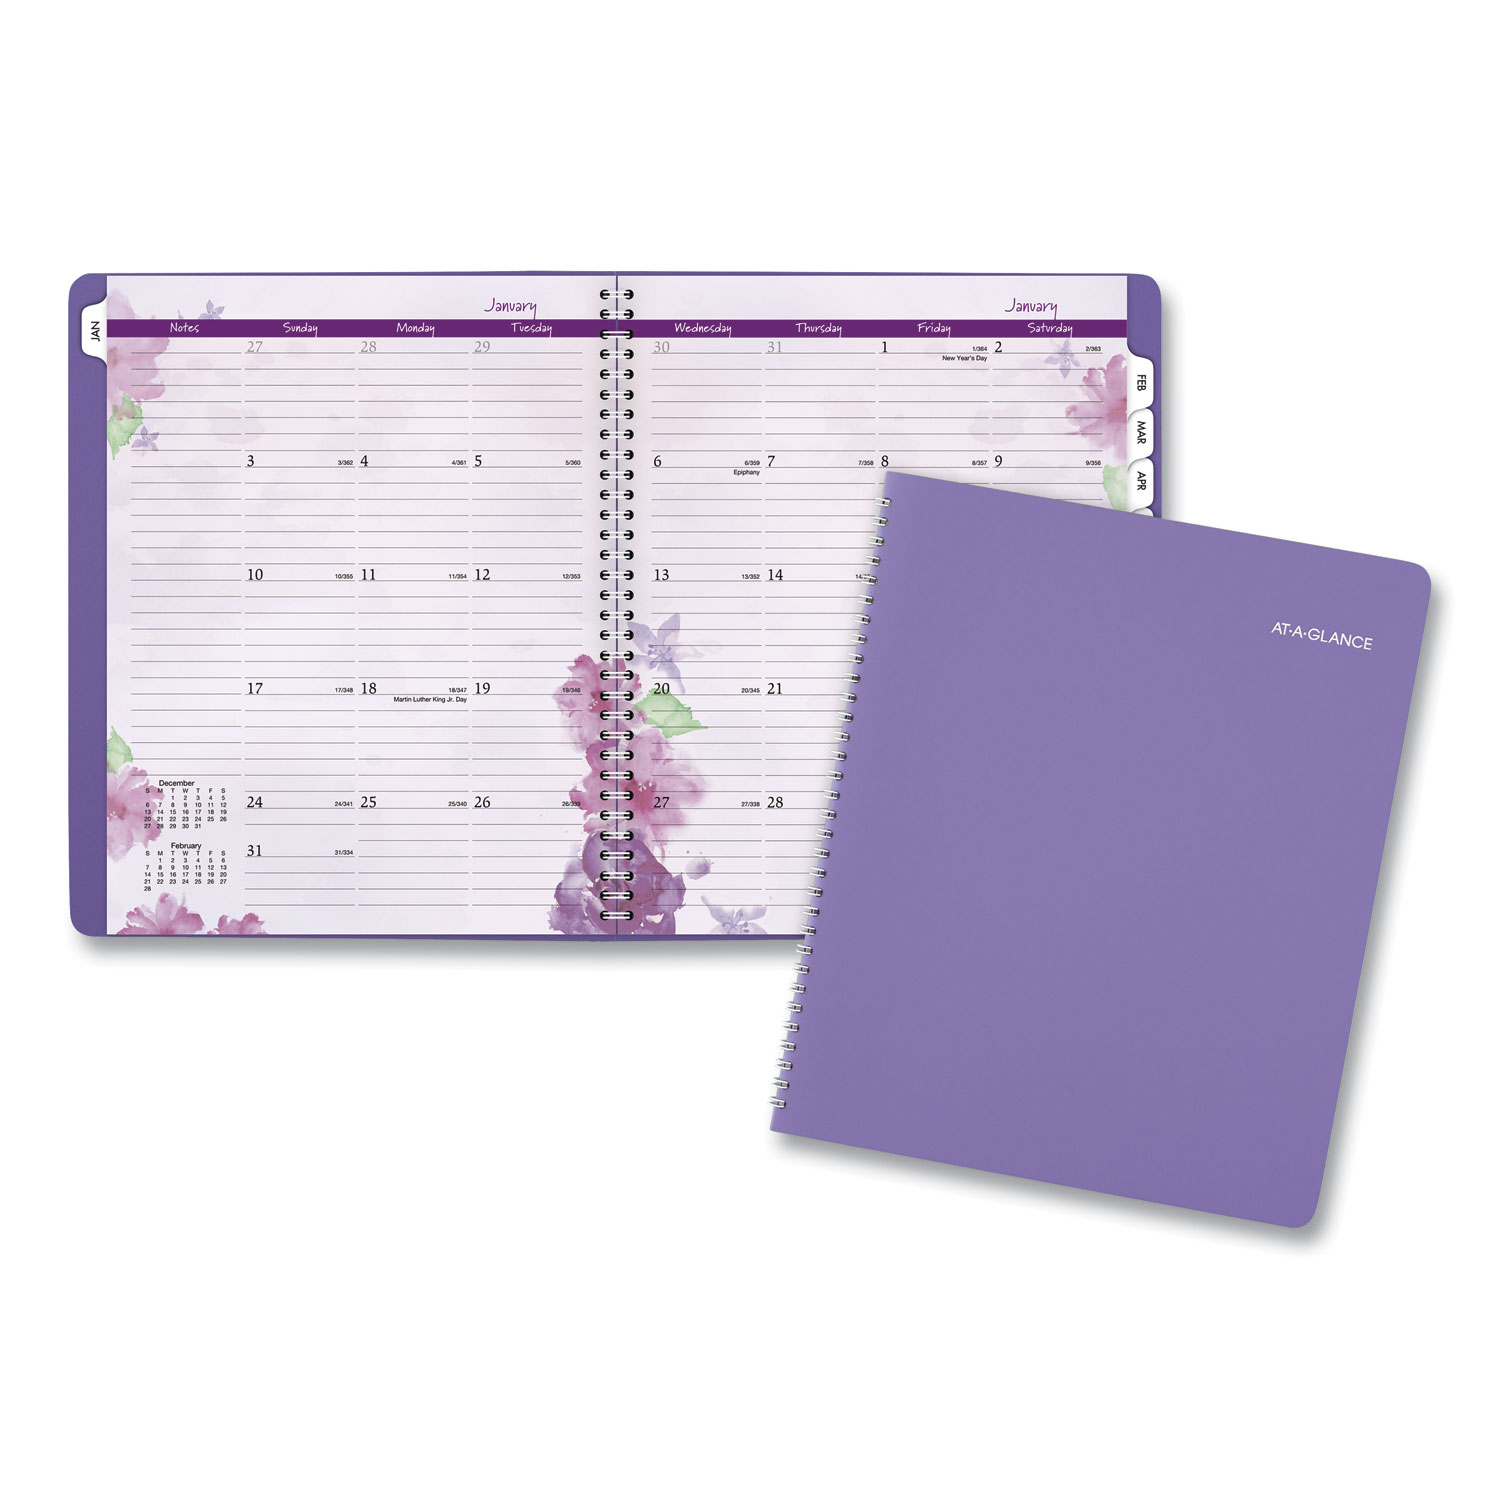  AT-A-GLANCE 938P-900 Beautiful Day Monthly Planner, 11 x 8 1/2, Purple, 2020 (AAG938P900) 